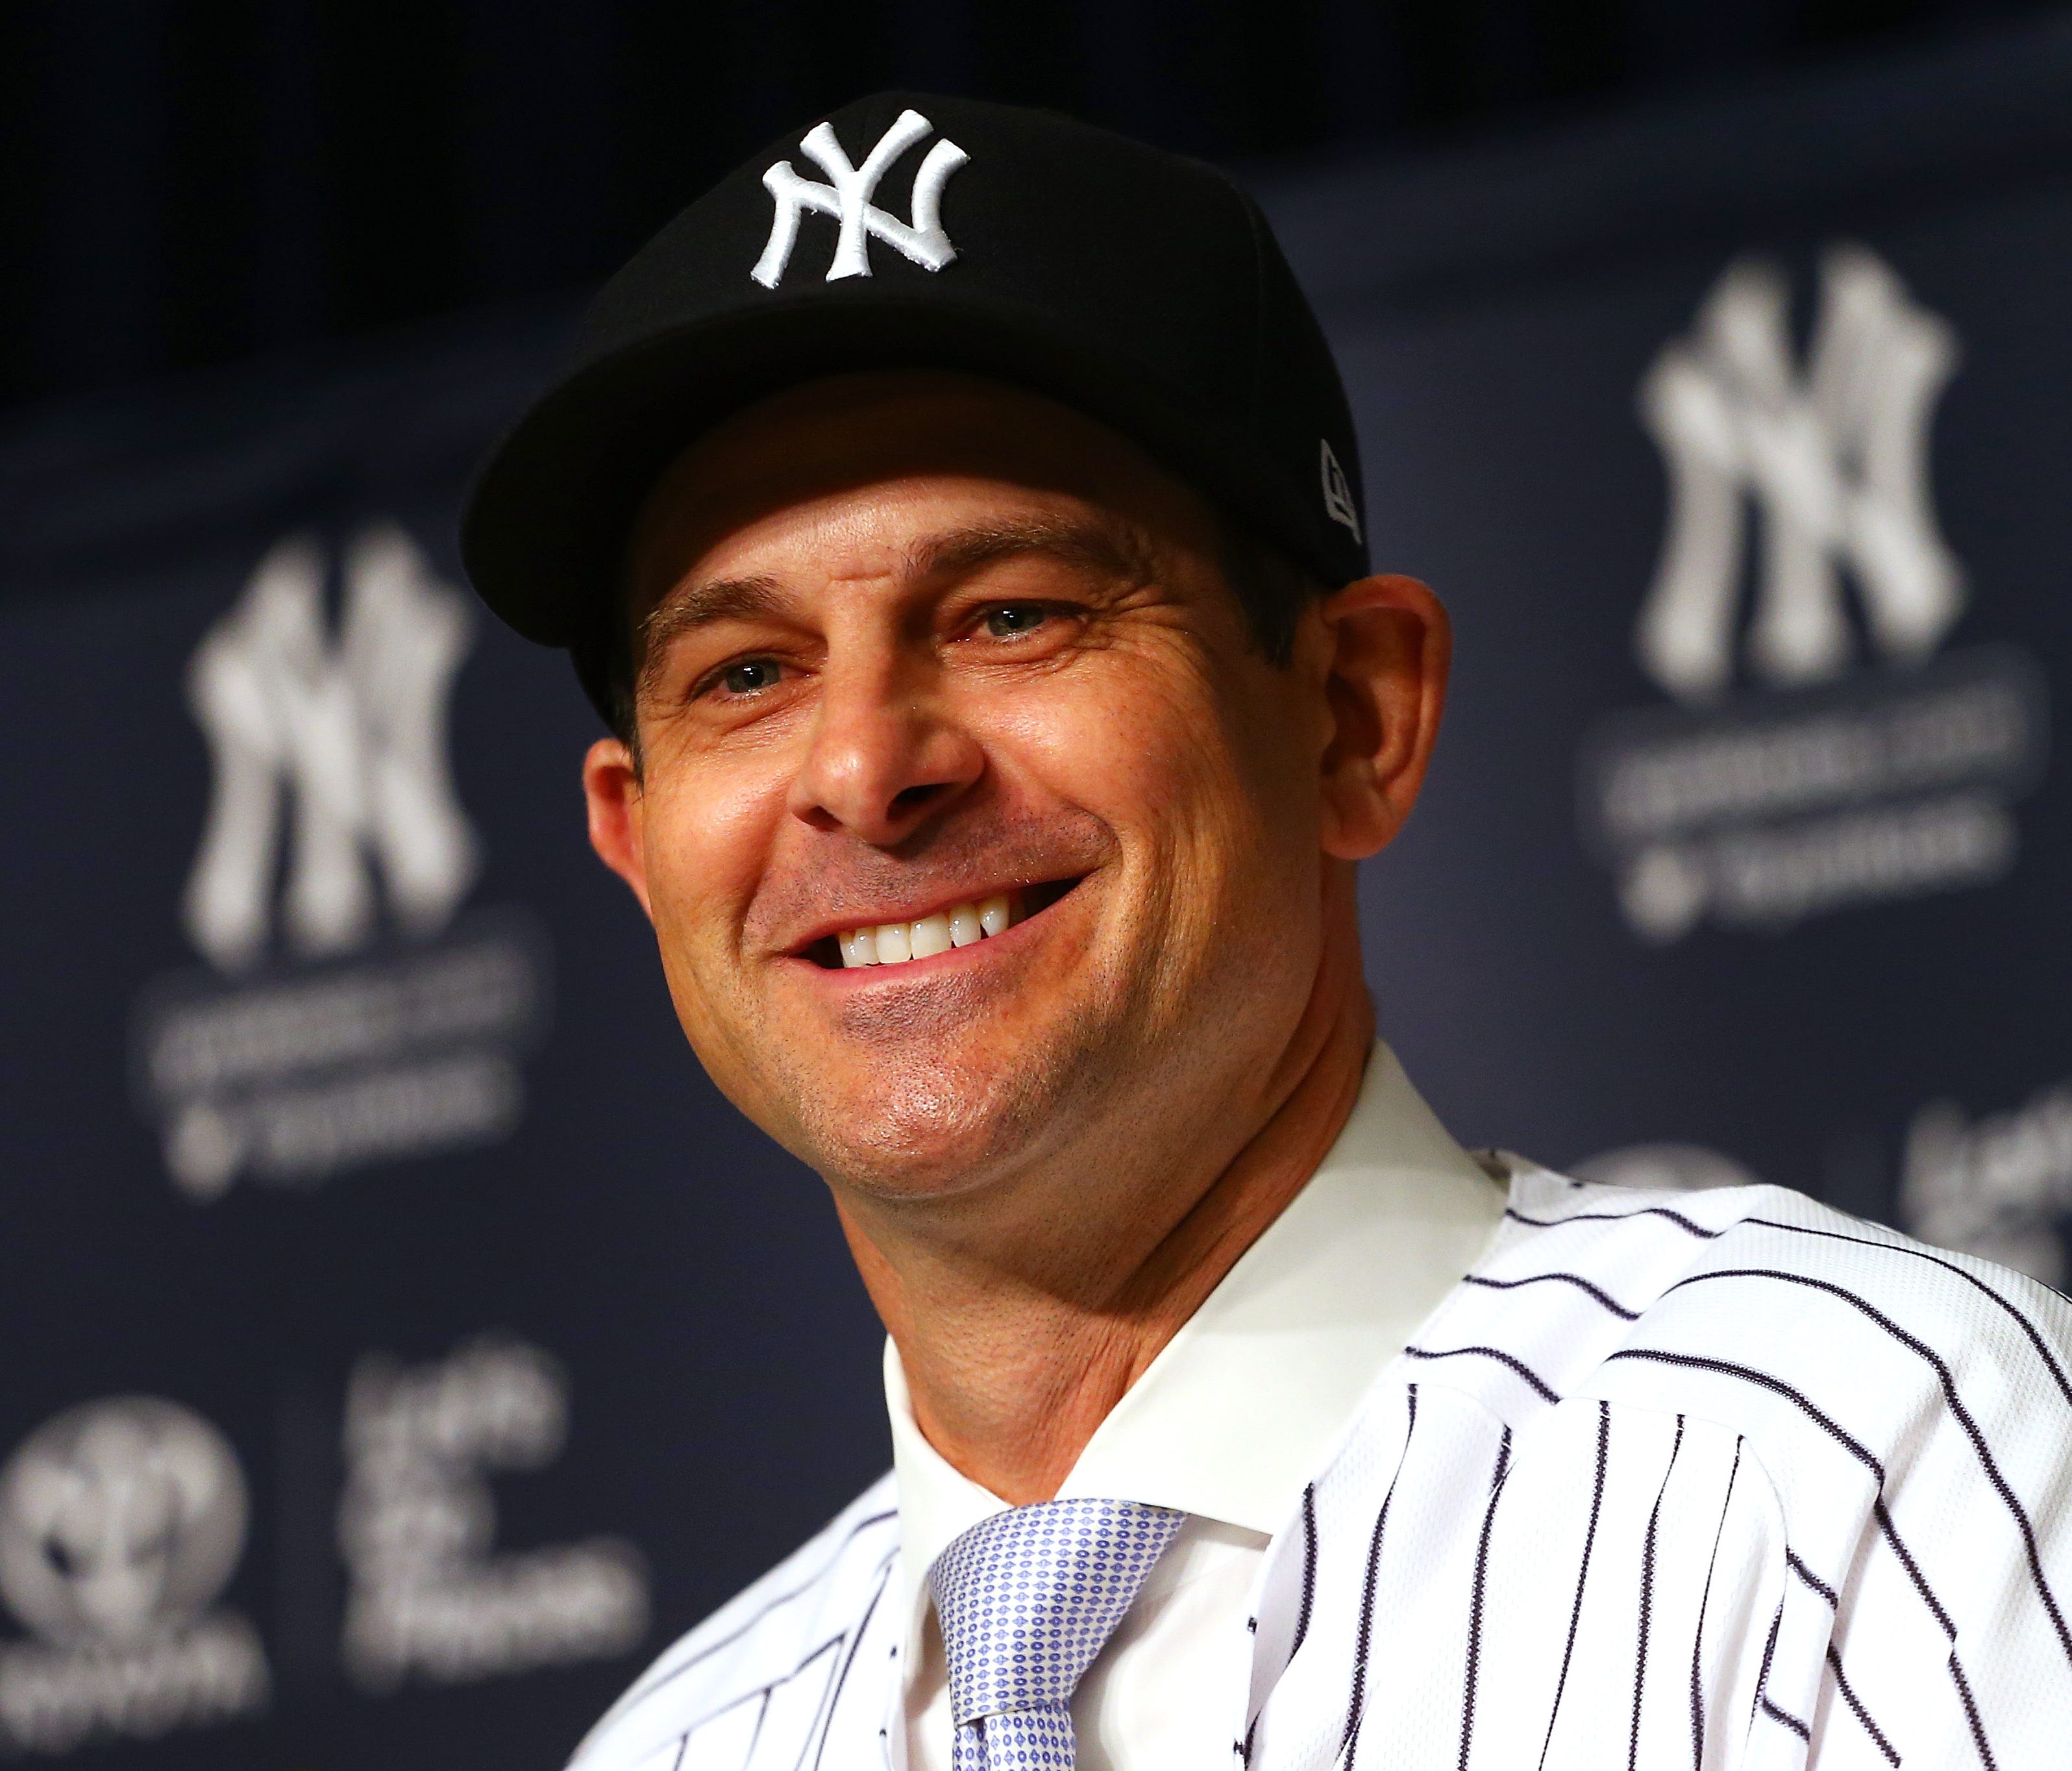 NEW YORK, NY - DECEMBER 06:  Aaron Boone speaks to the media after being introduced as manager of the New York Yankees at Yankee Stadium on December 6, 2017 in the Bronx borough of New York City.  (Photo by Mike Stobe/Getty Images) ORG XMIT: 77508773